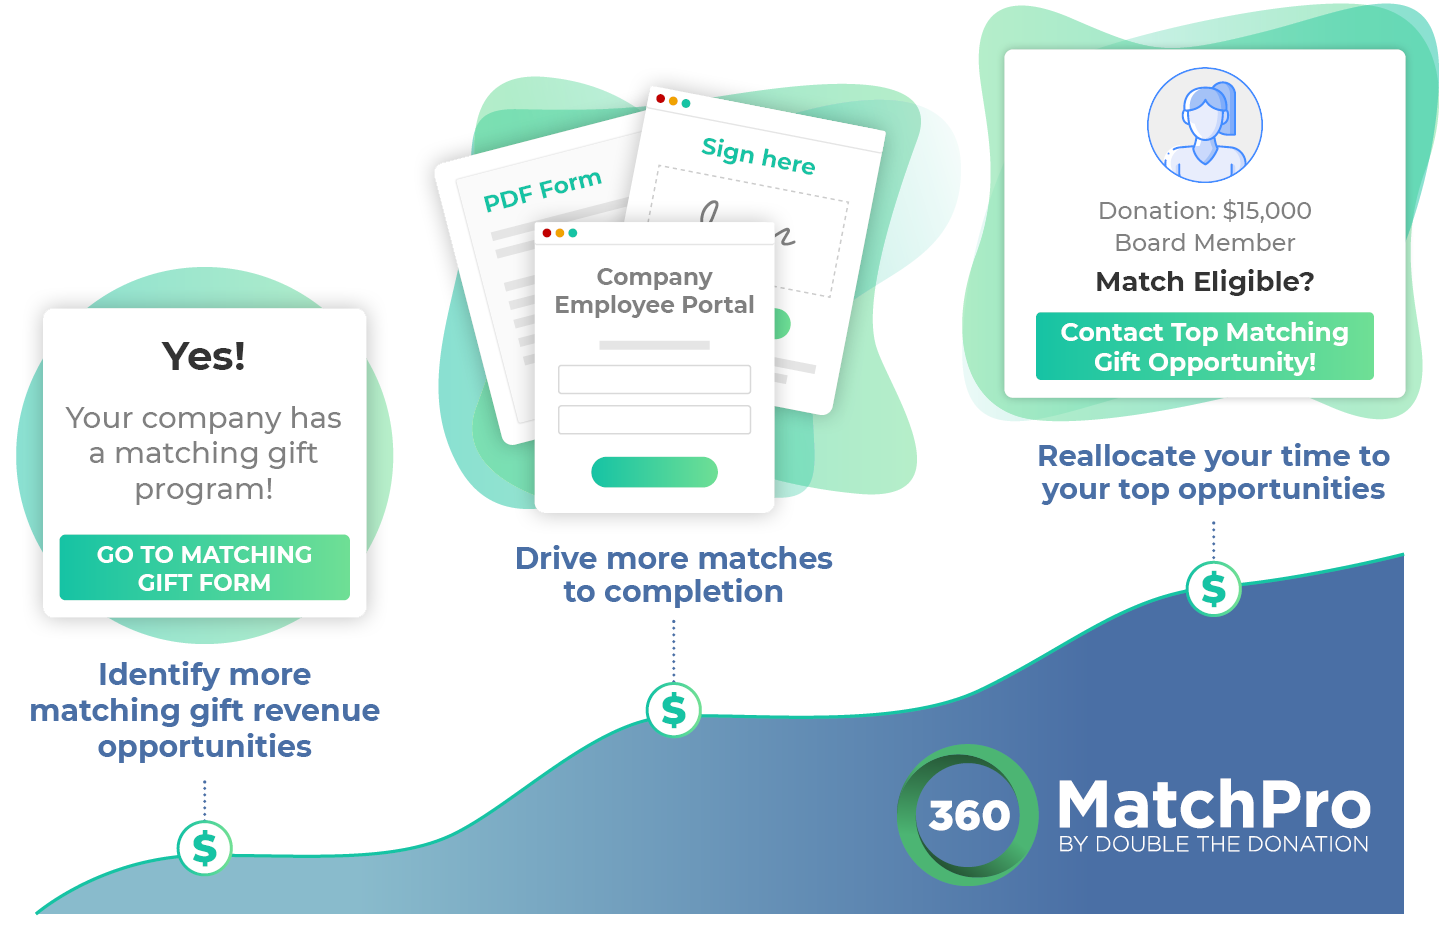 360MatchPro provides value to your nonprofit